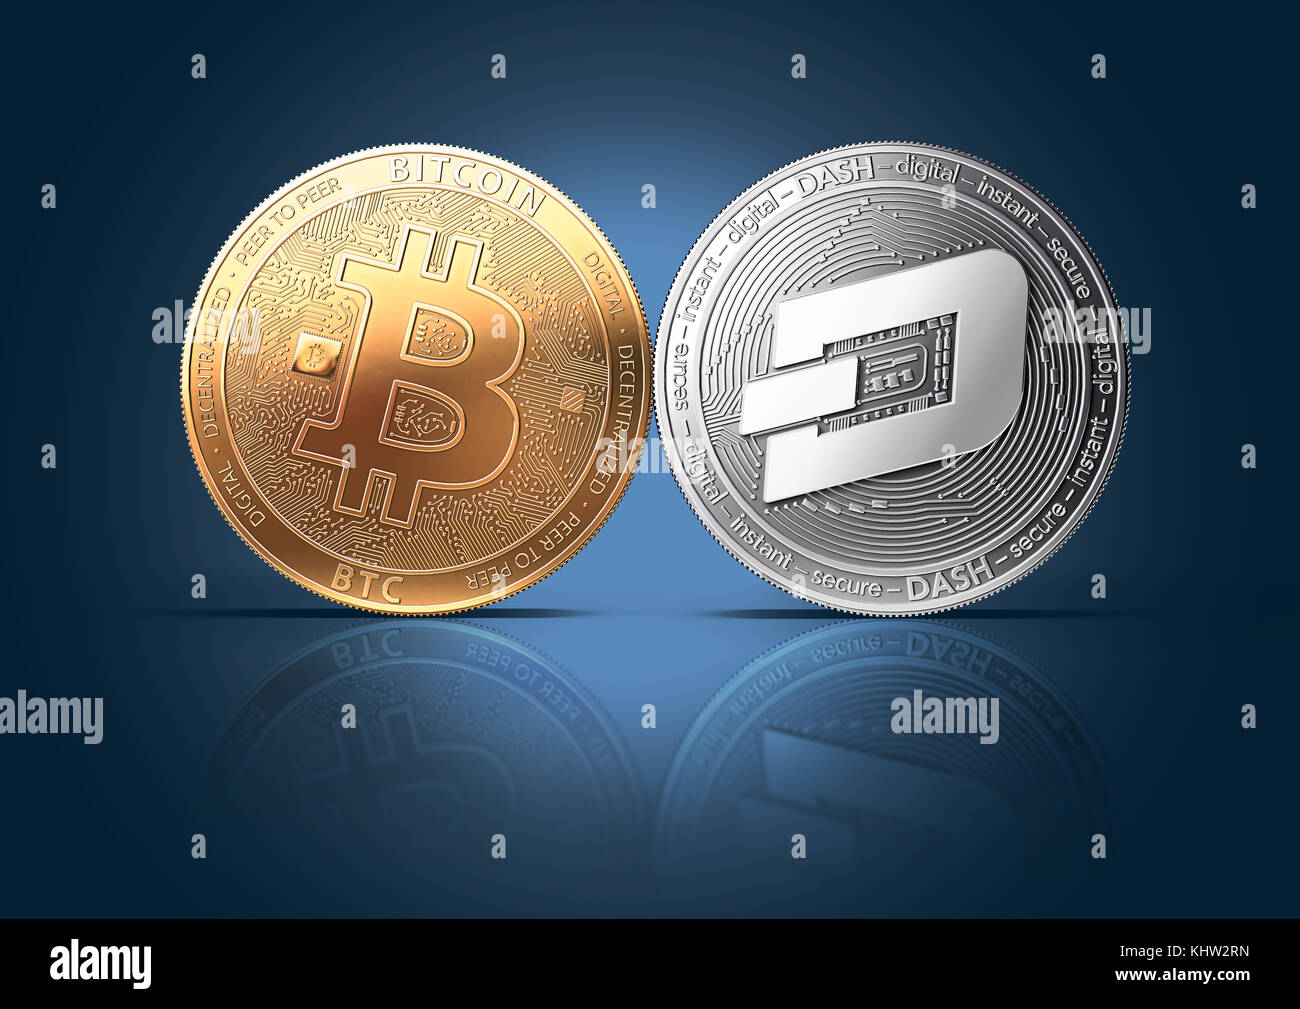 Clash of Bitcoin and Dash coins on a gently lit background with copy space. Competing cryptocurrencies concept. 3D rendering Stock Photo